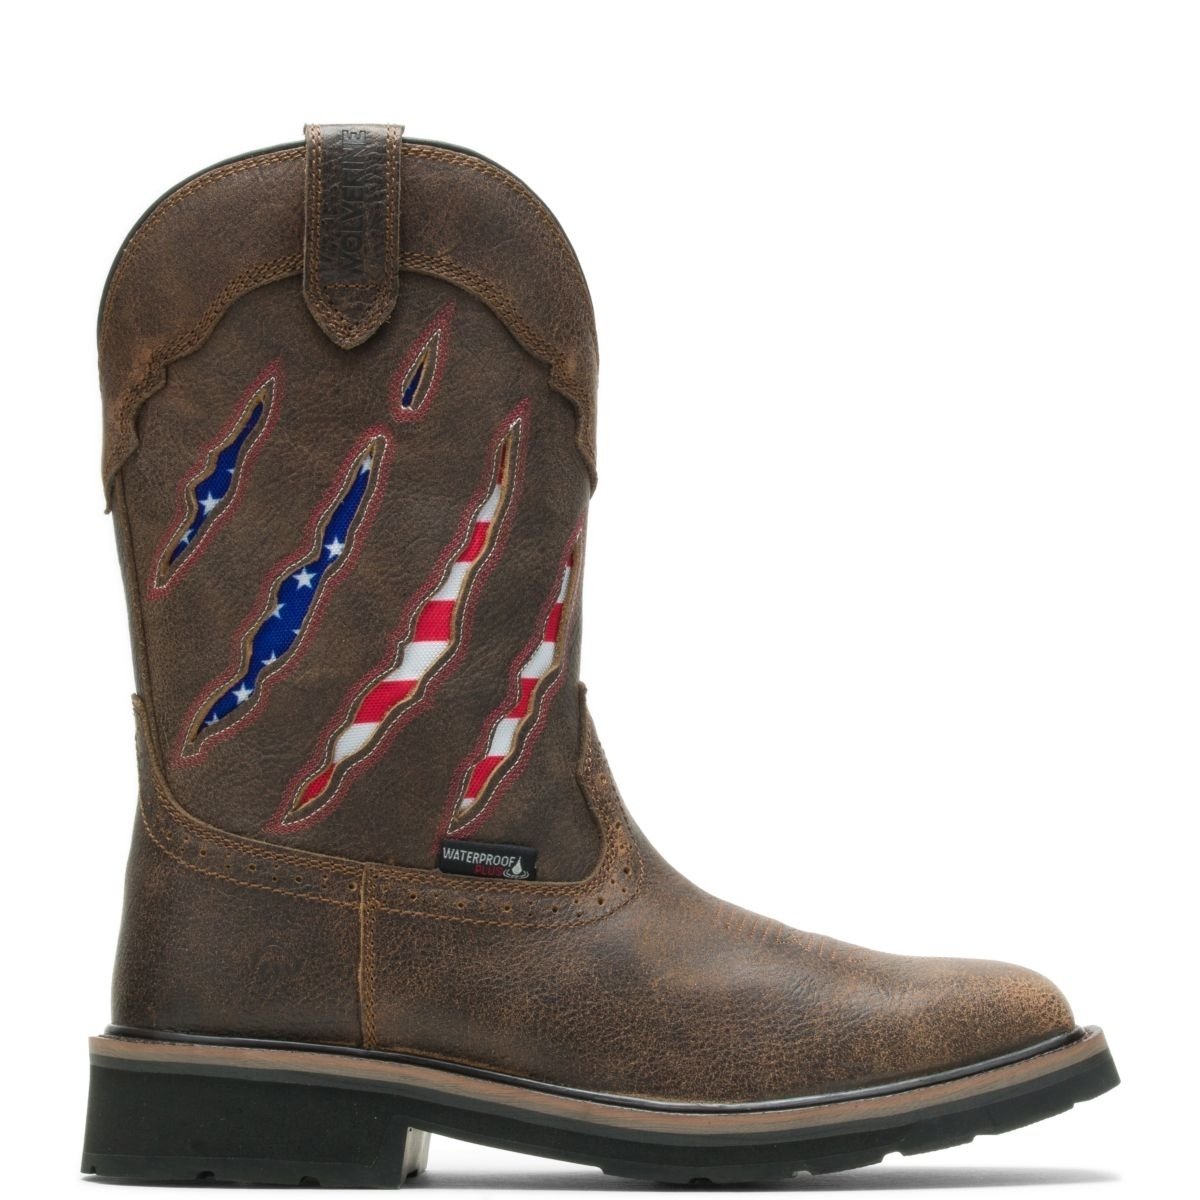 WOLVERINE Men's Rancher Claw Wellington Soft Toe Work Boot Brown/Flag - W200138 Flag/brown - Flag/brown, 8.5 X-Wide